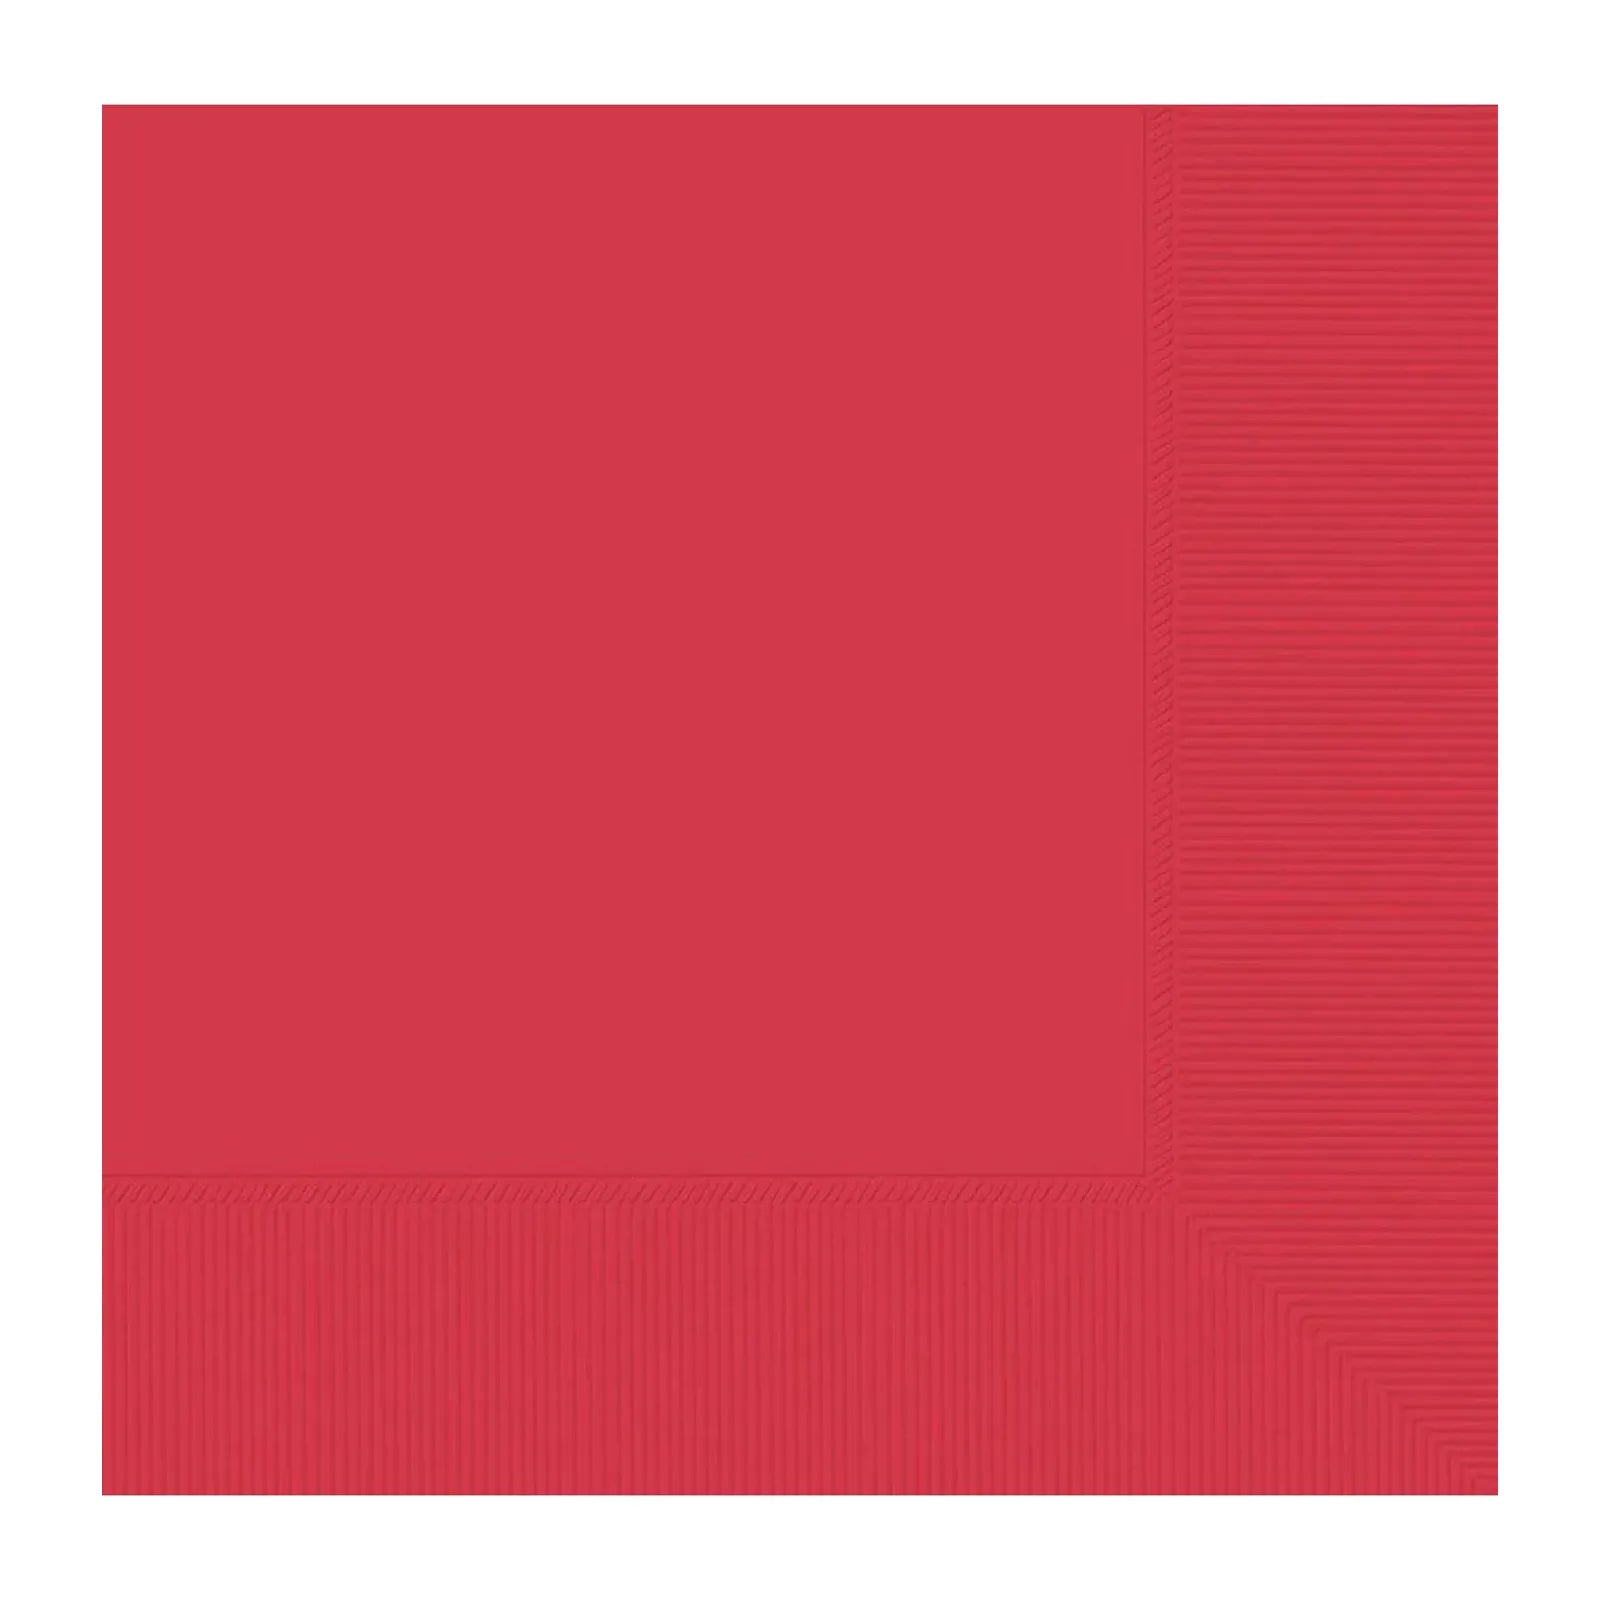 RED LUNCHEON NAPKINS / SERVIETTES (PACK OF 20)